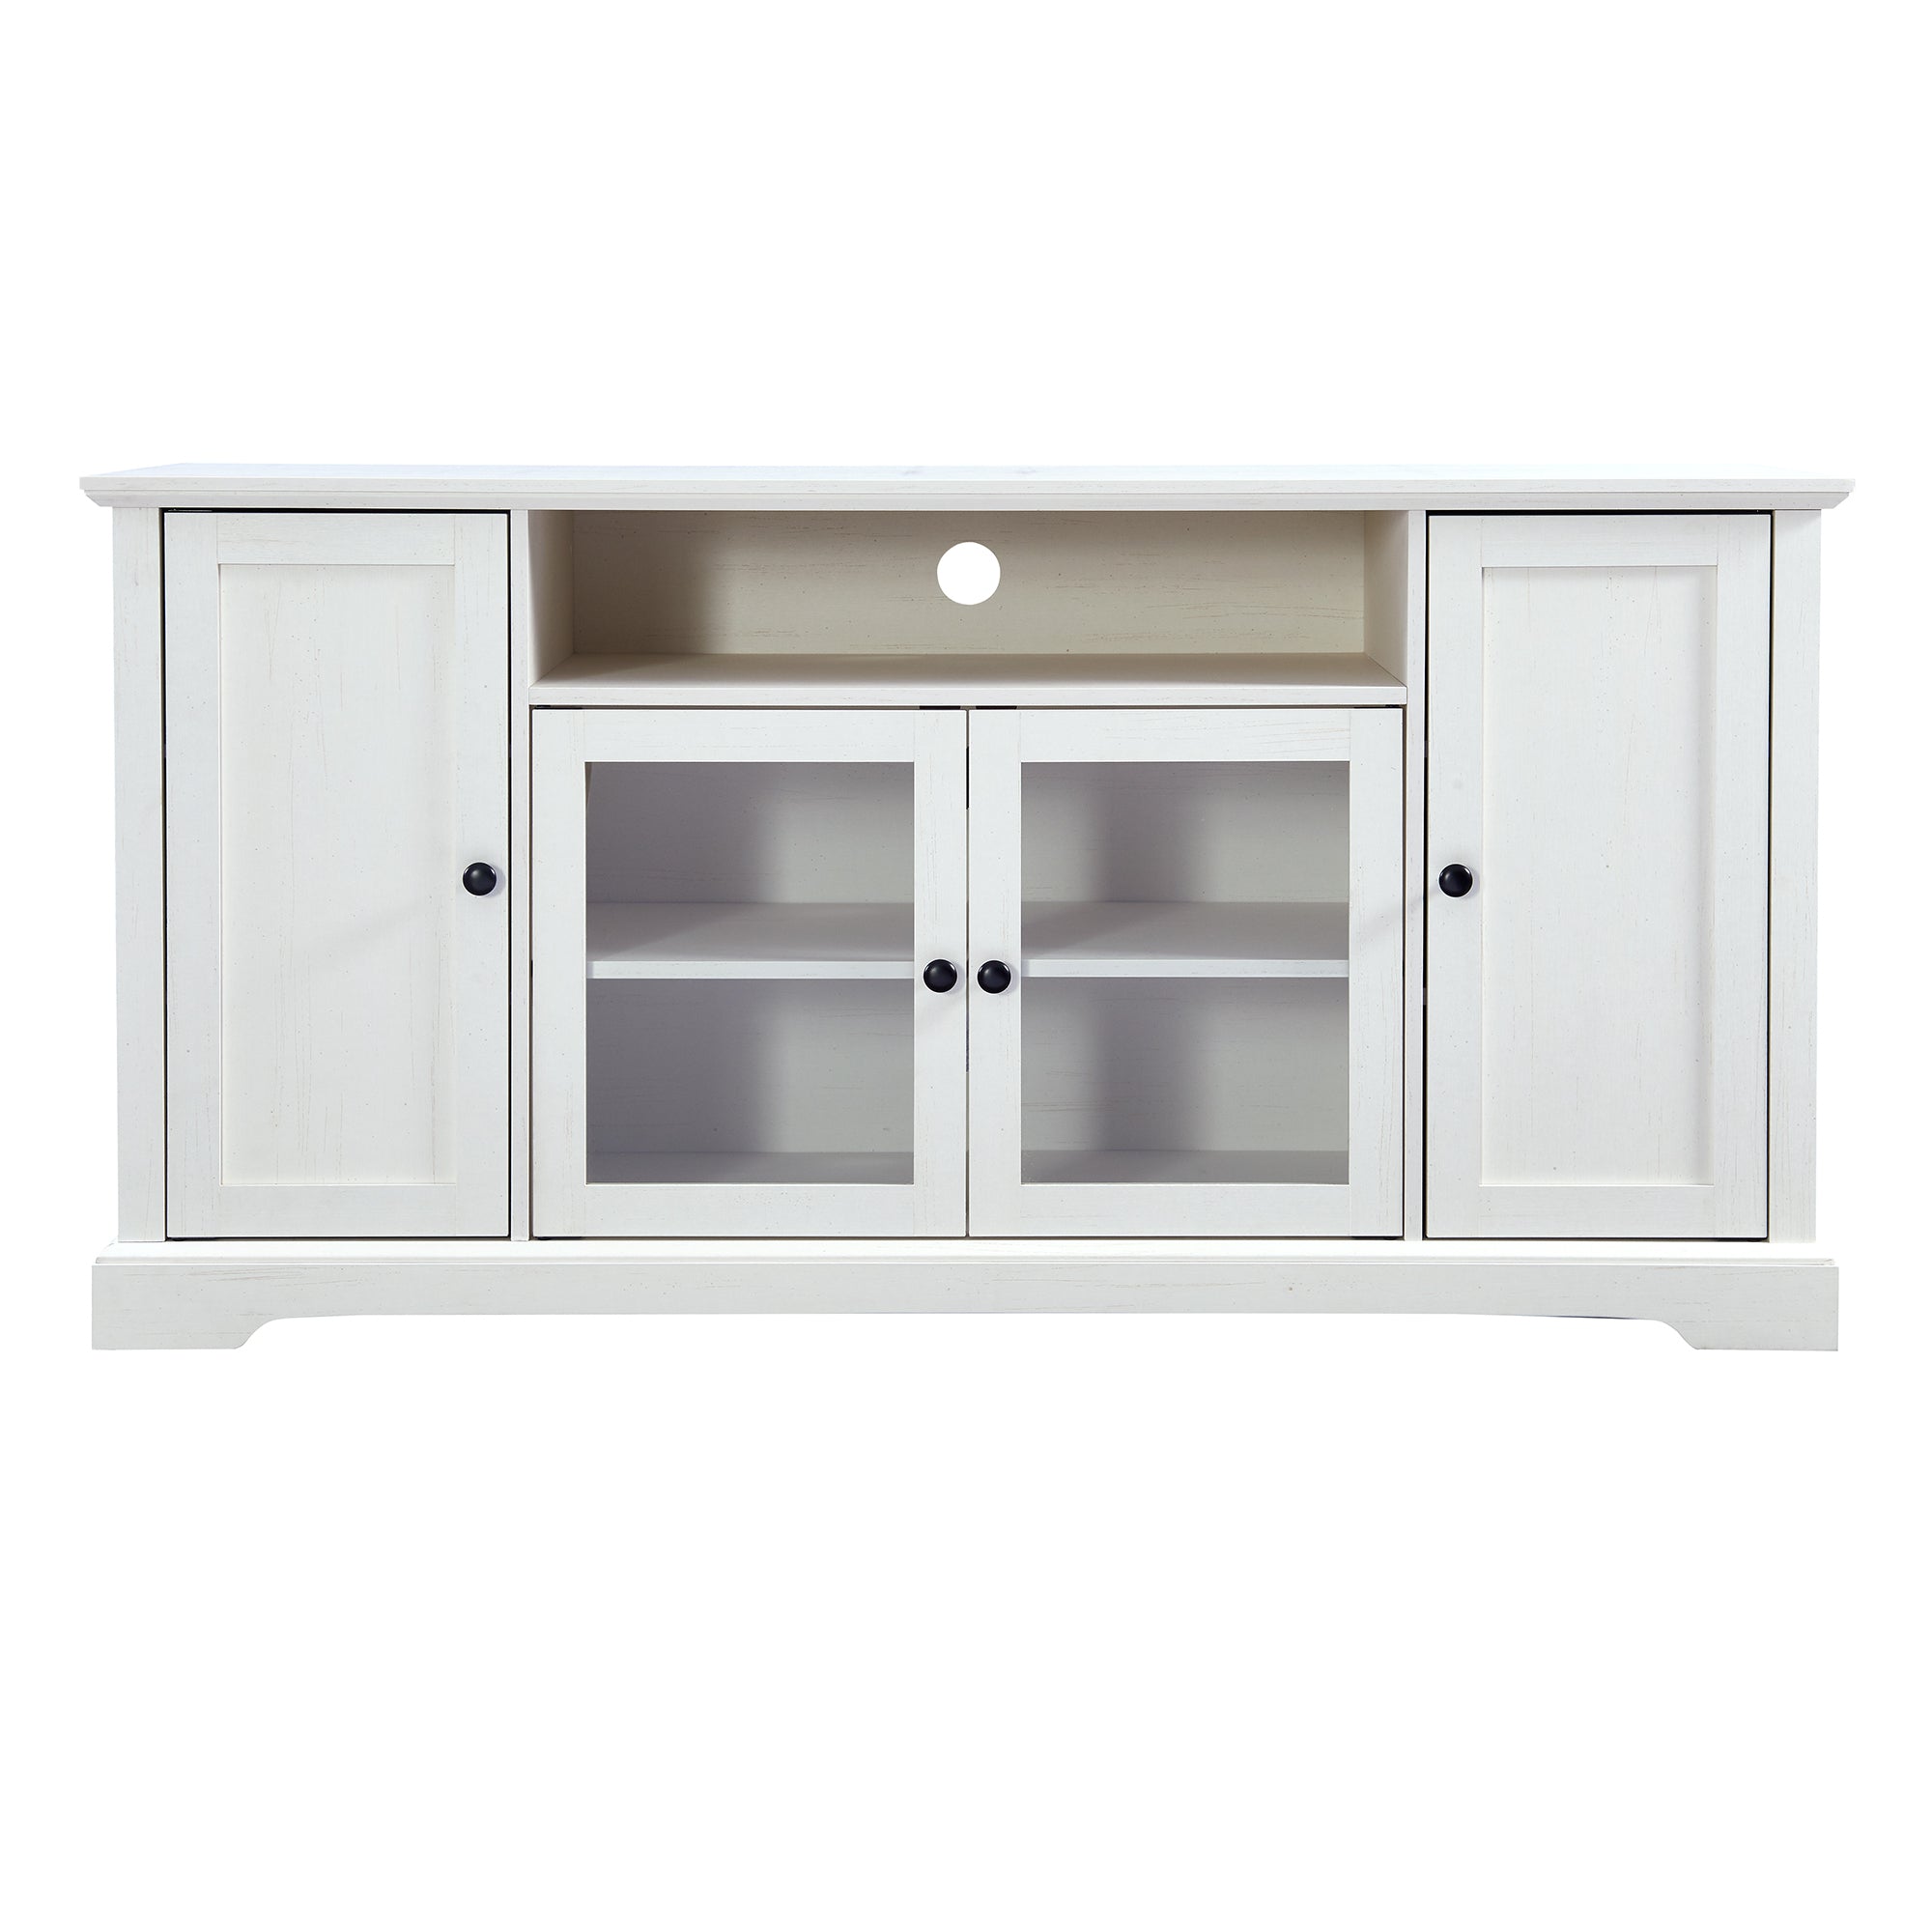 TV Stand with 2 Tempered Glass Doors, Adjustable Panels, Open Style Cabinet & Sideboard for TVs up to 65", White